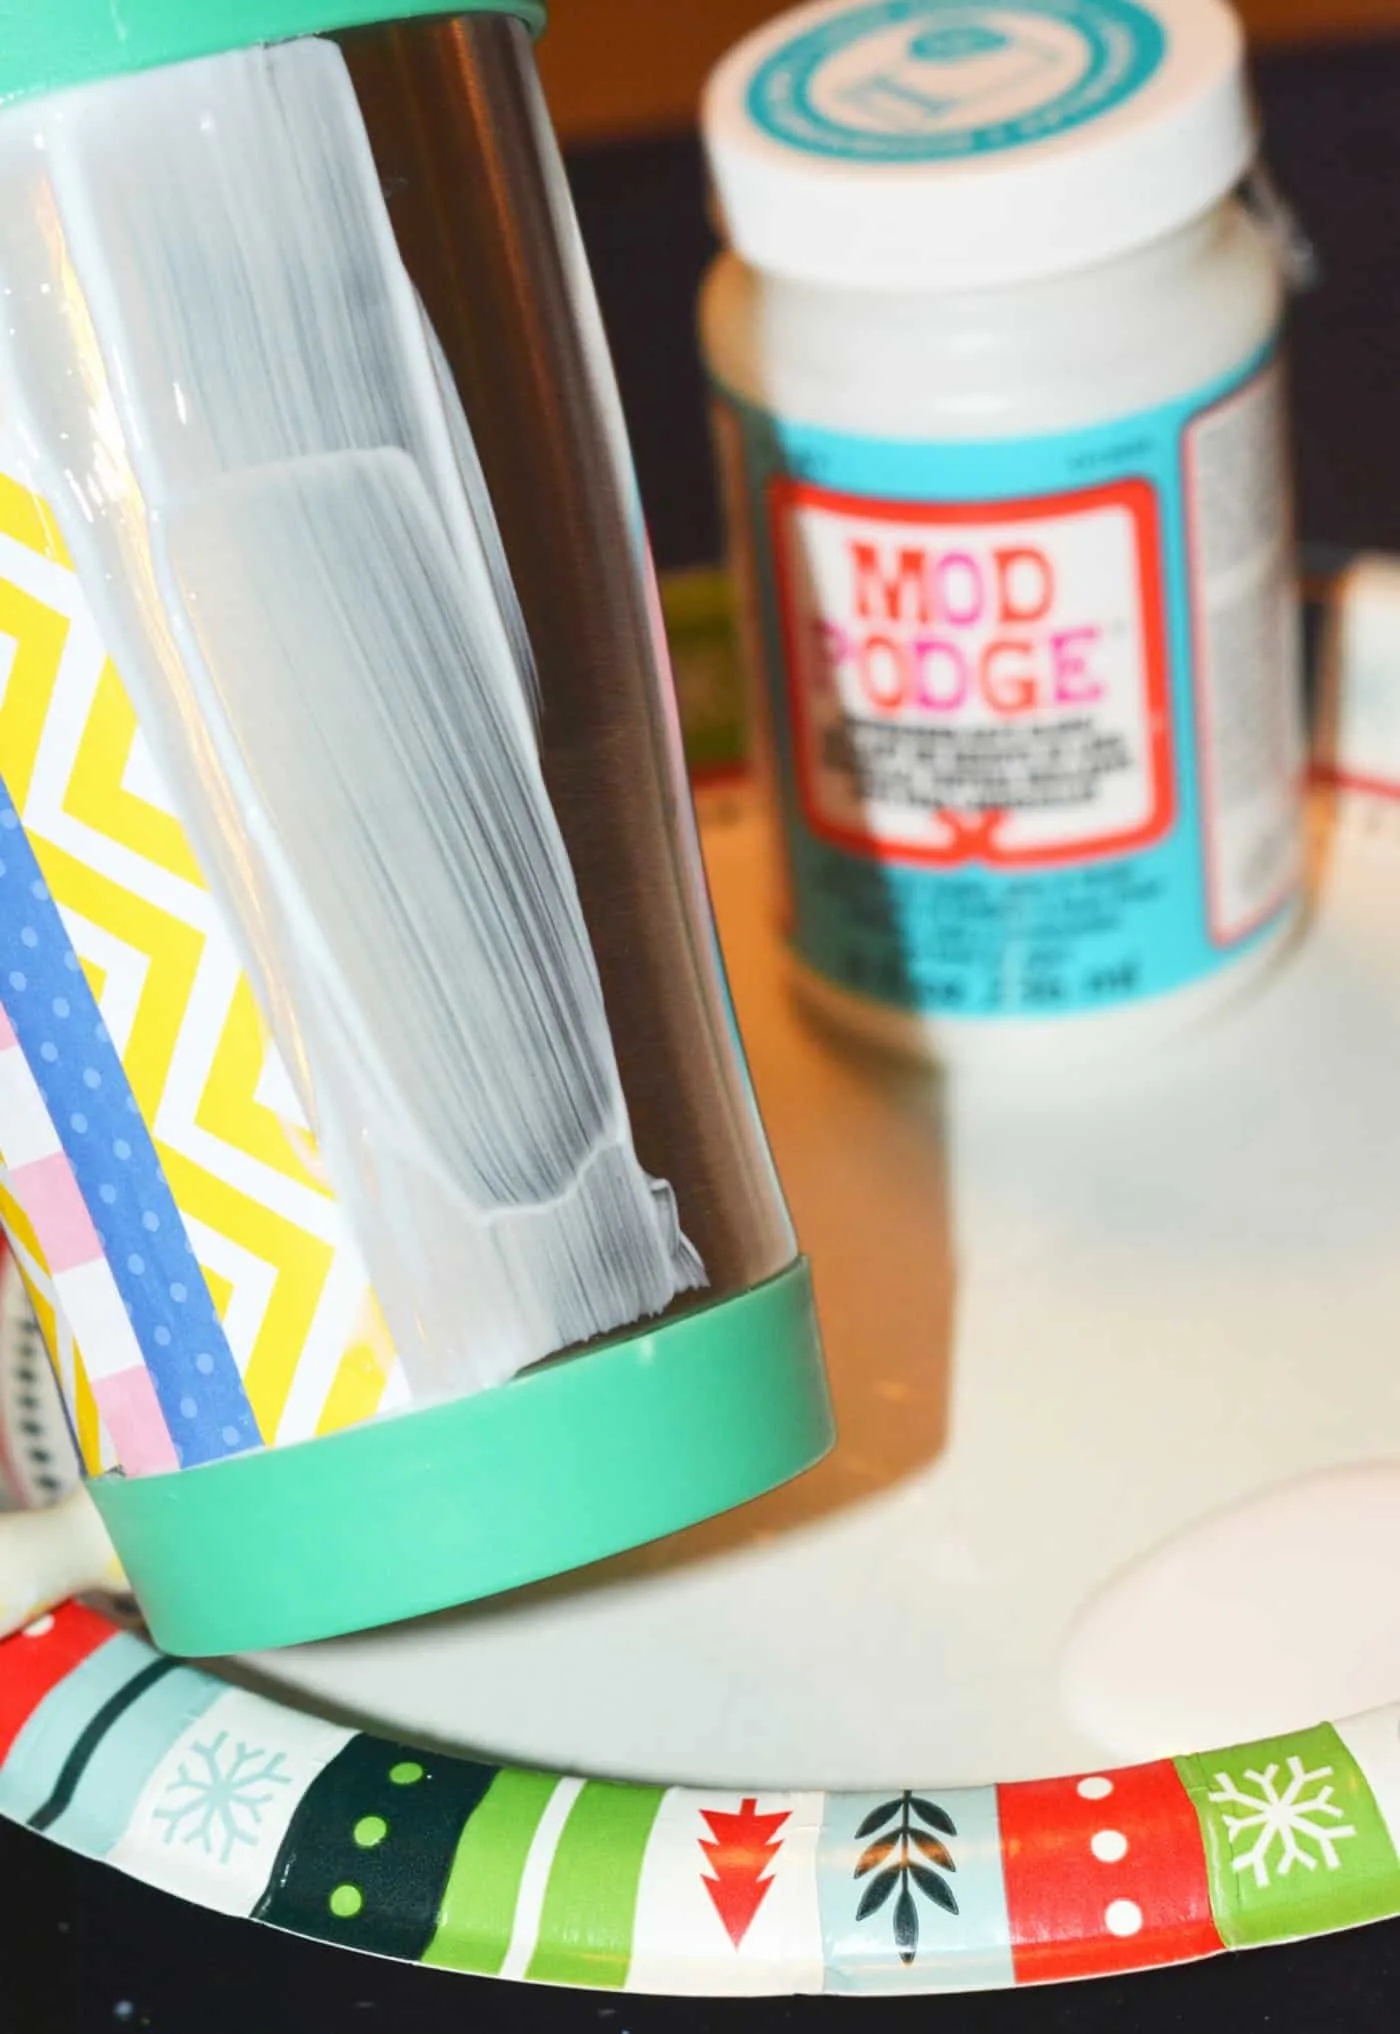 Placing paper on top of the Mod Podge on the side of the mug